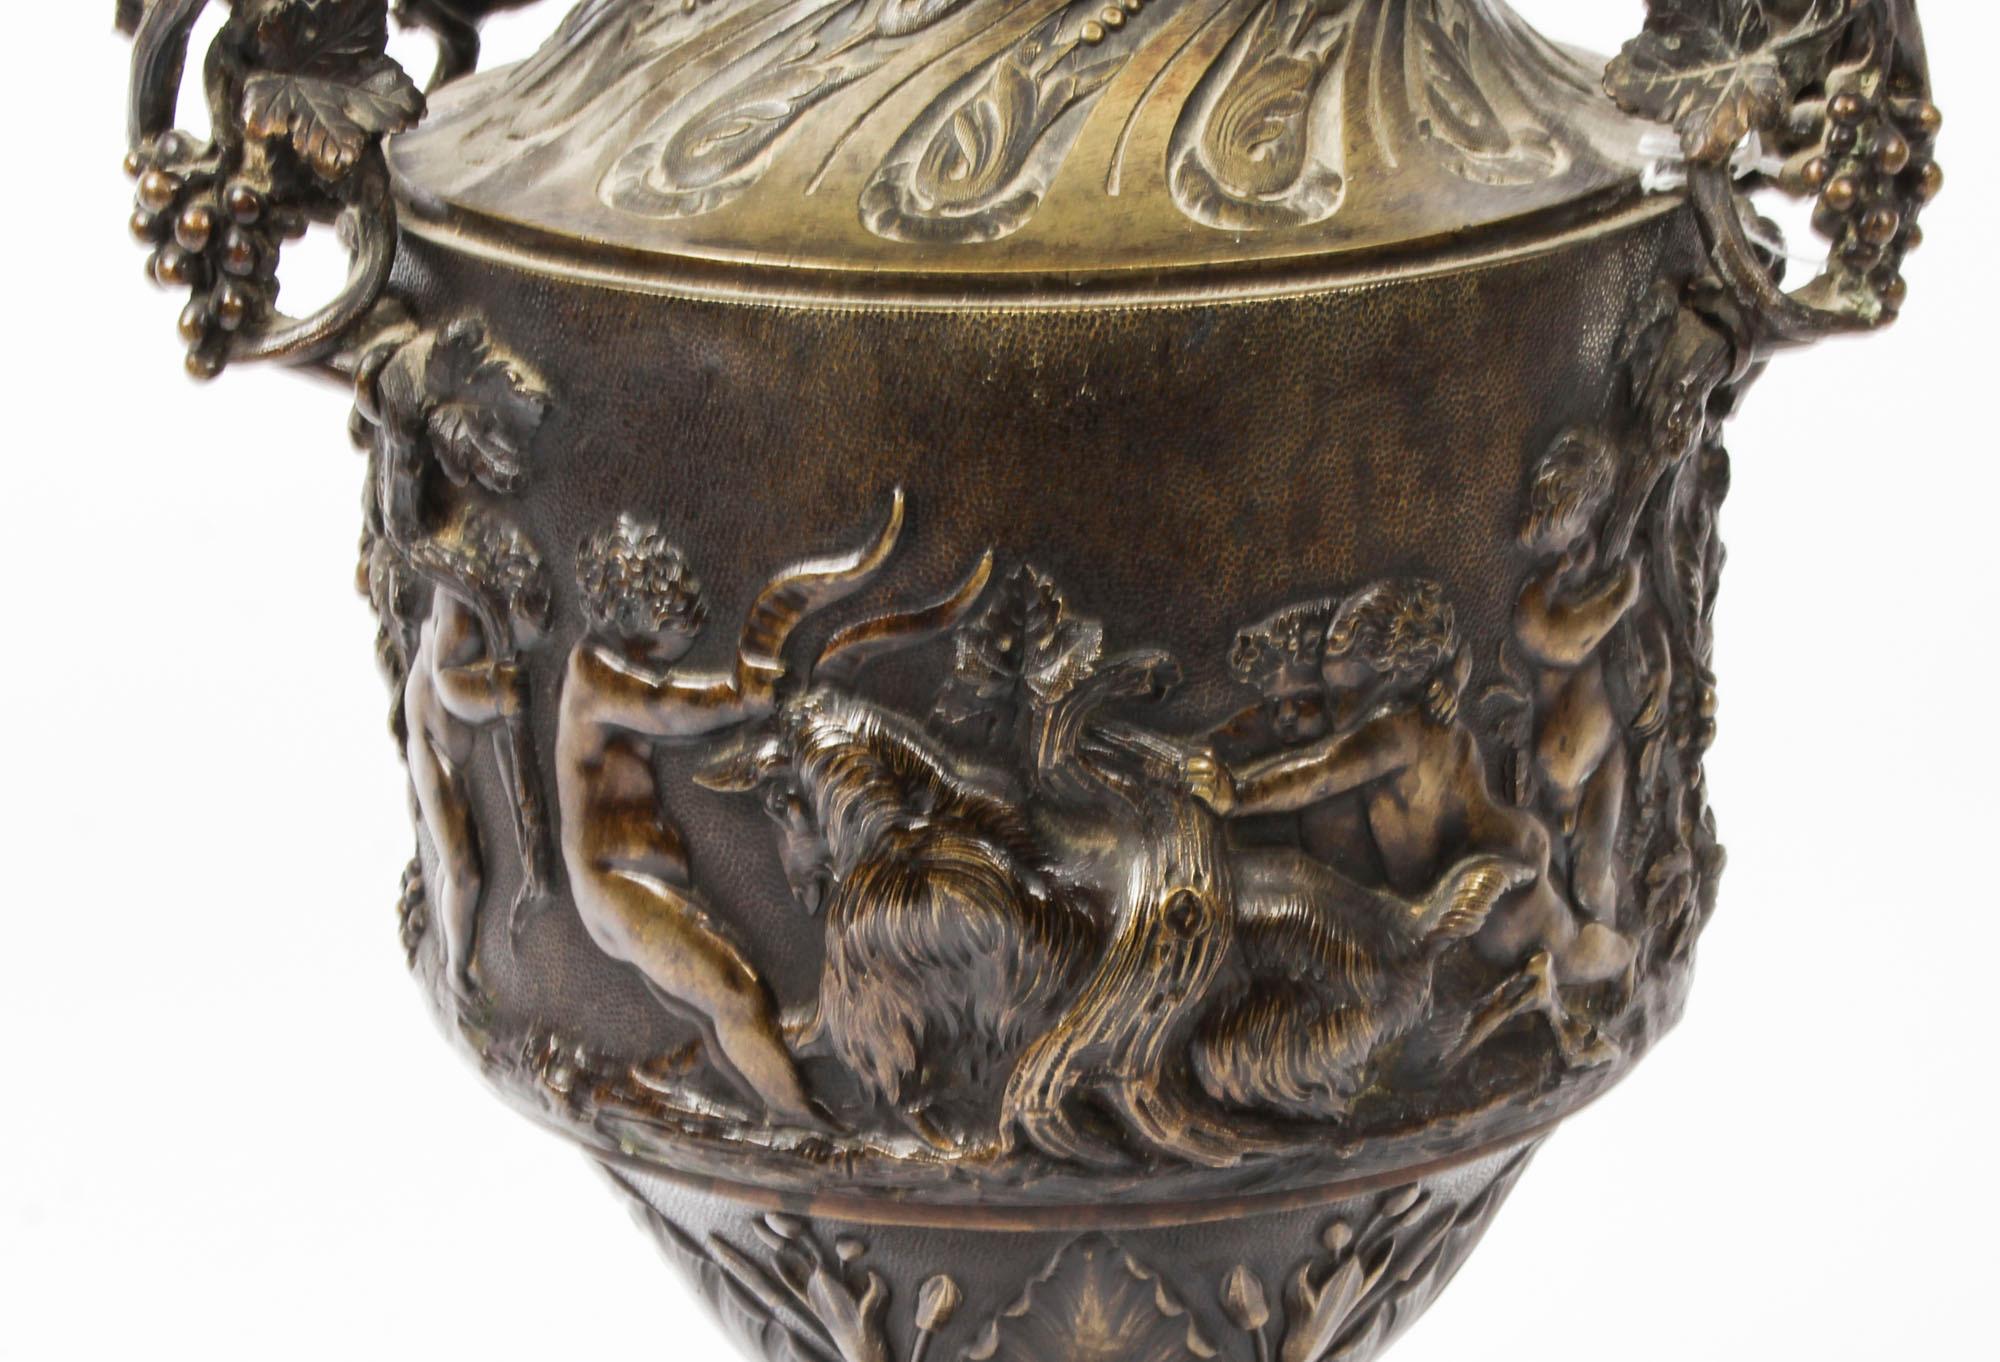 A superb antique French Grand Tour patinated bronze urn, circa 1840 in date.
 
This stunning Renaissance style cast patinated bronze amphora shaped urn. It features a body cast in high relief in the form of grape vines held aloft by putti tha are